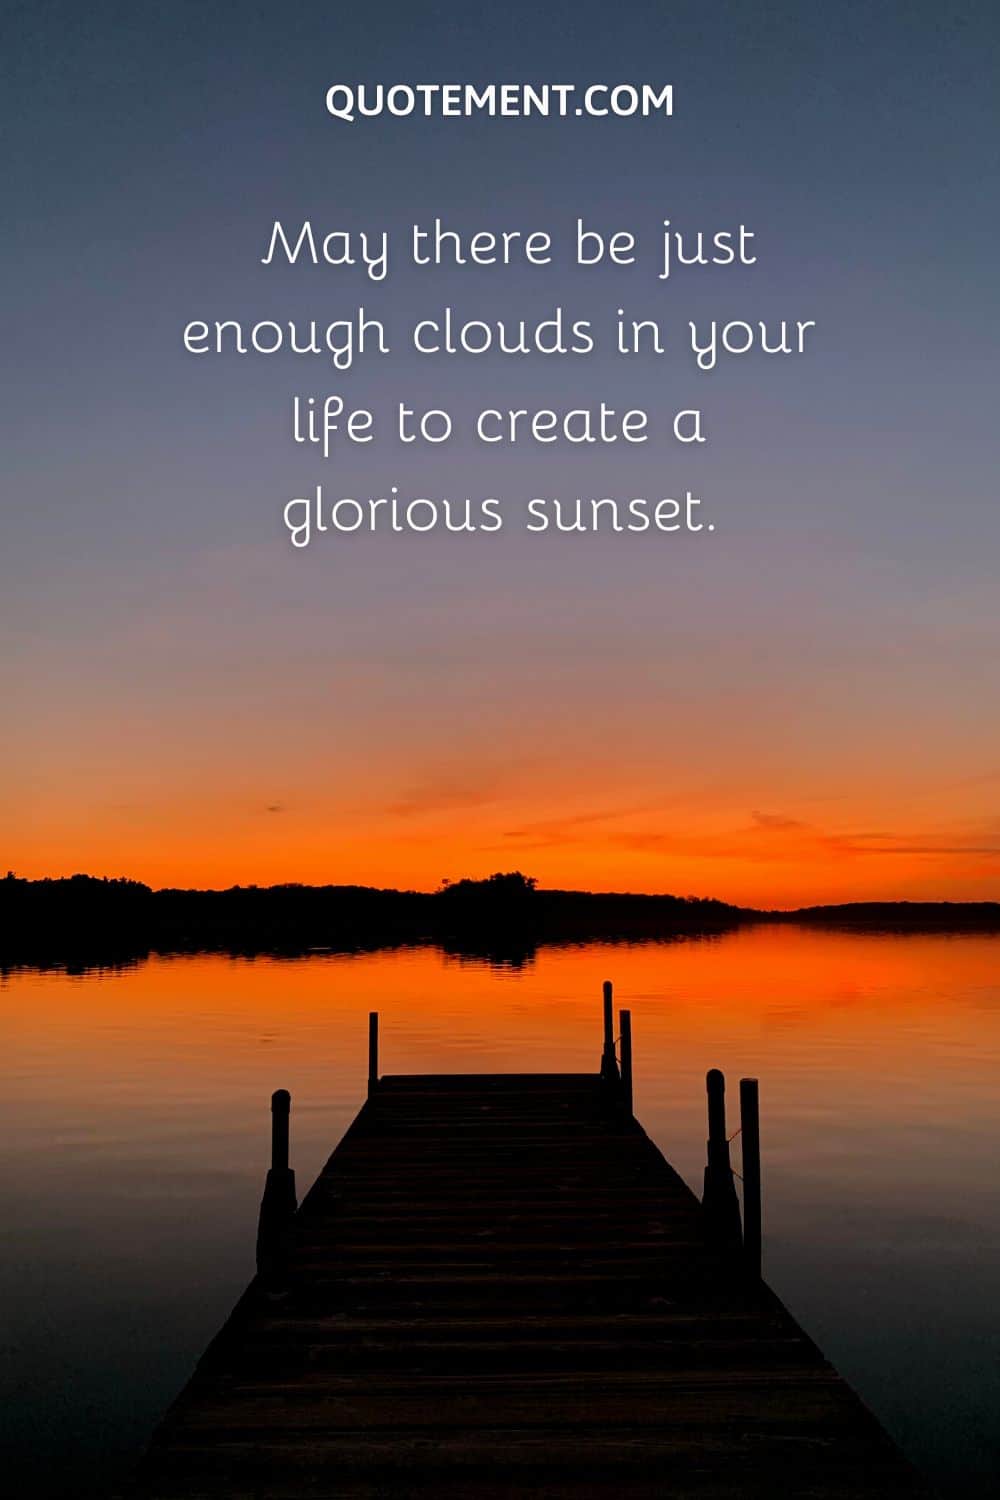 May there be just enough clouds in your life to create a glorious sunset.